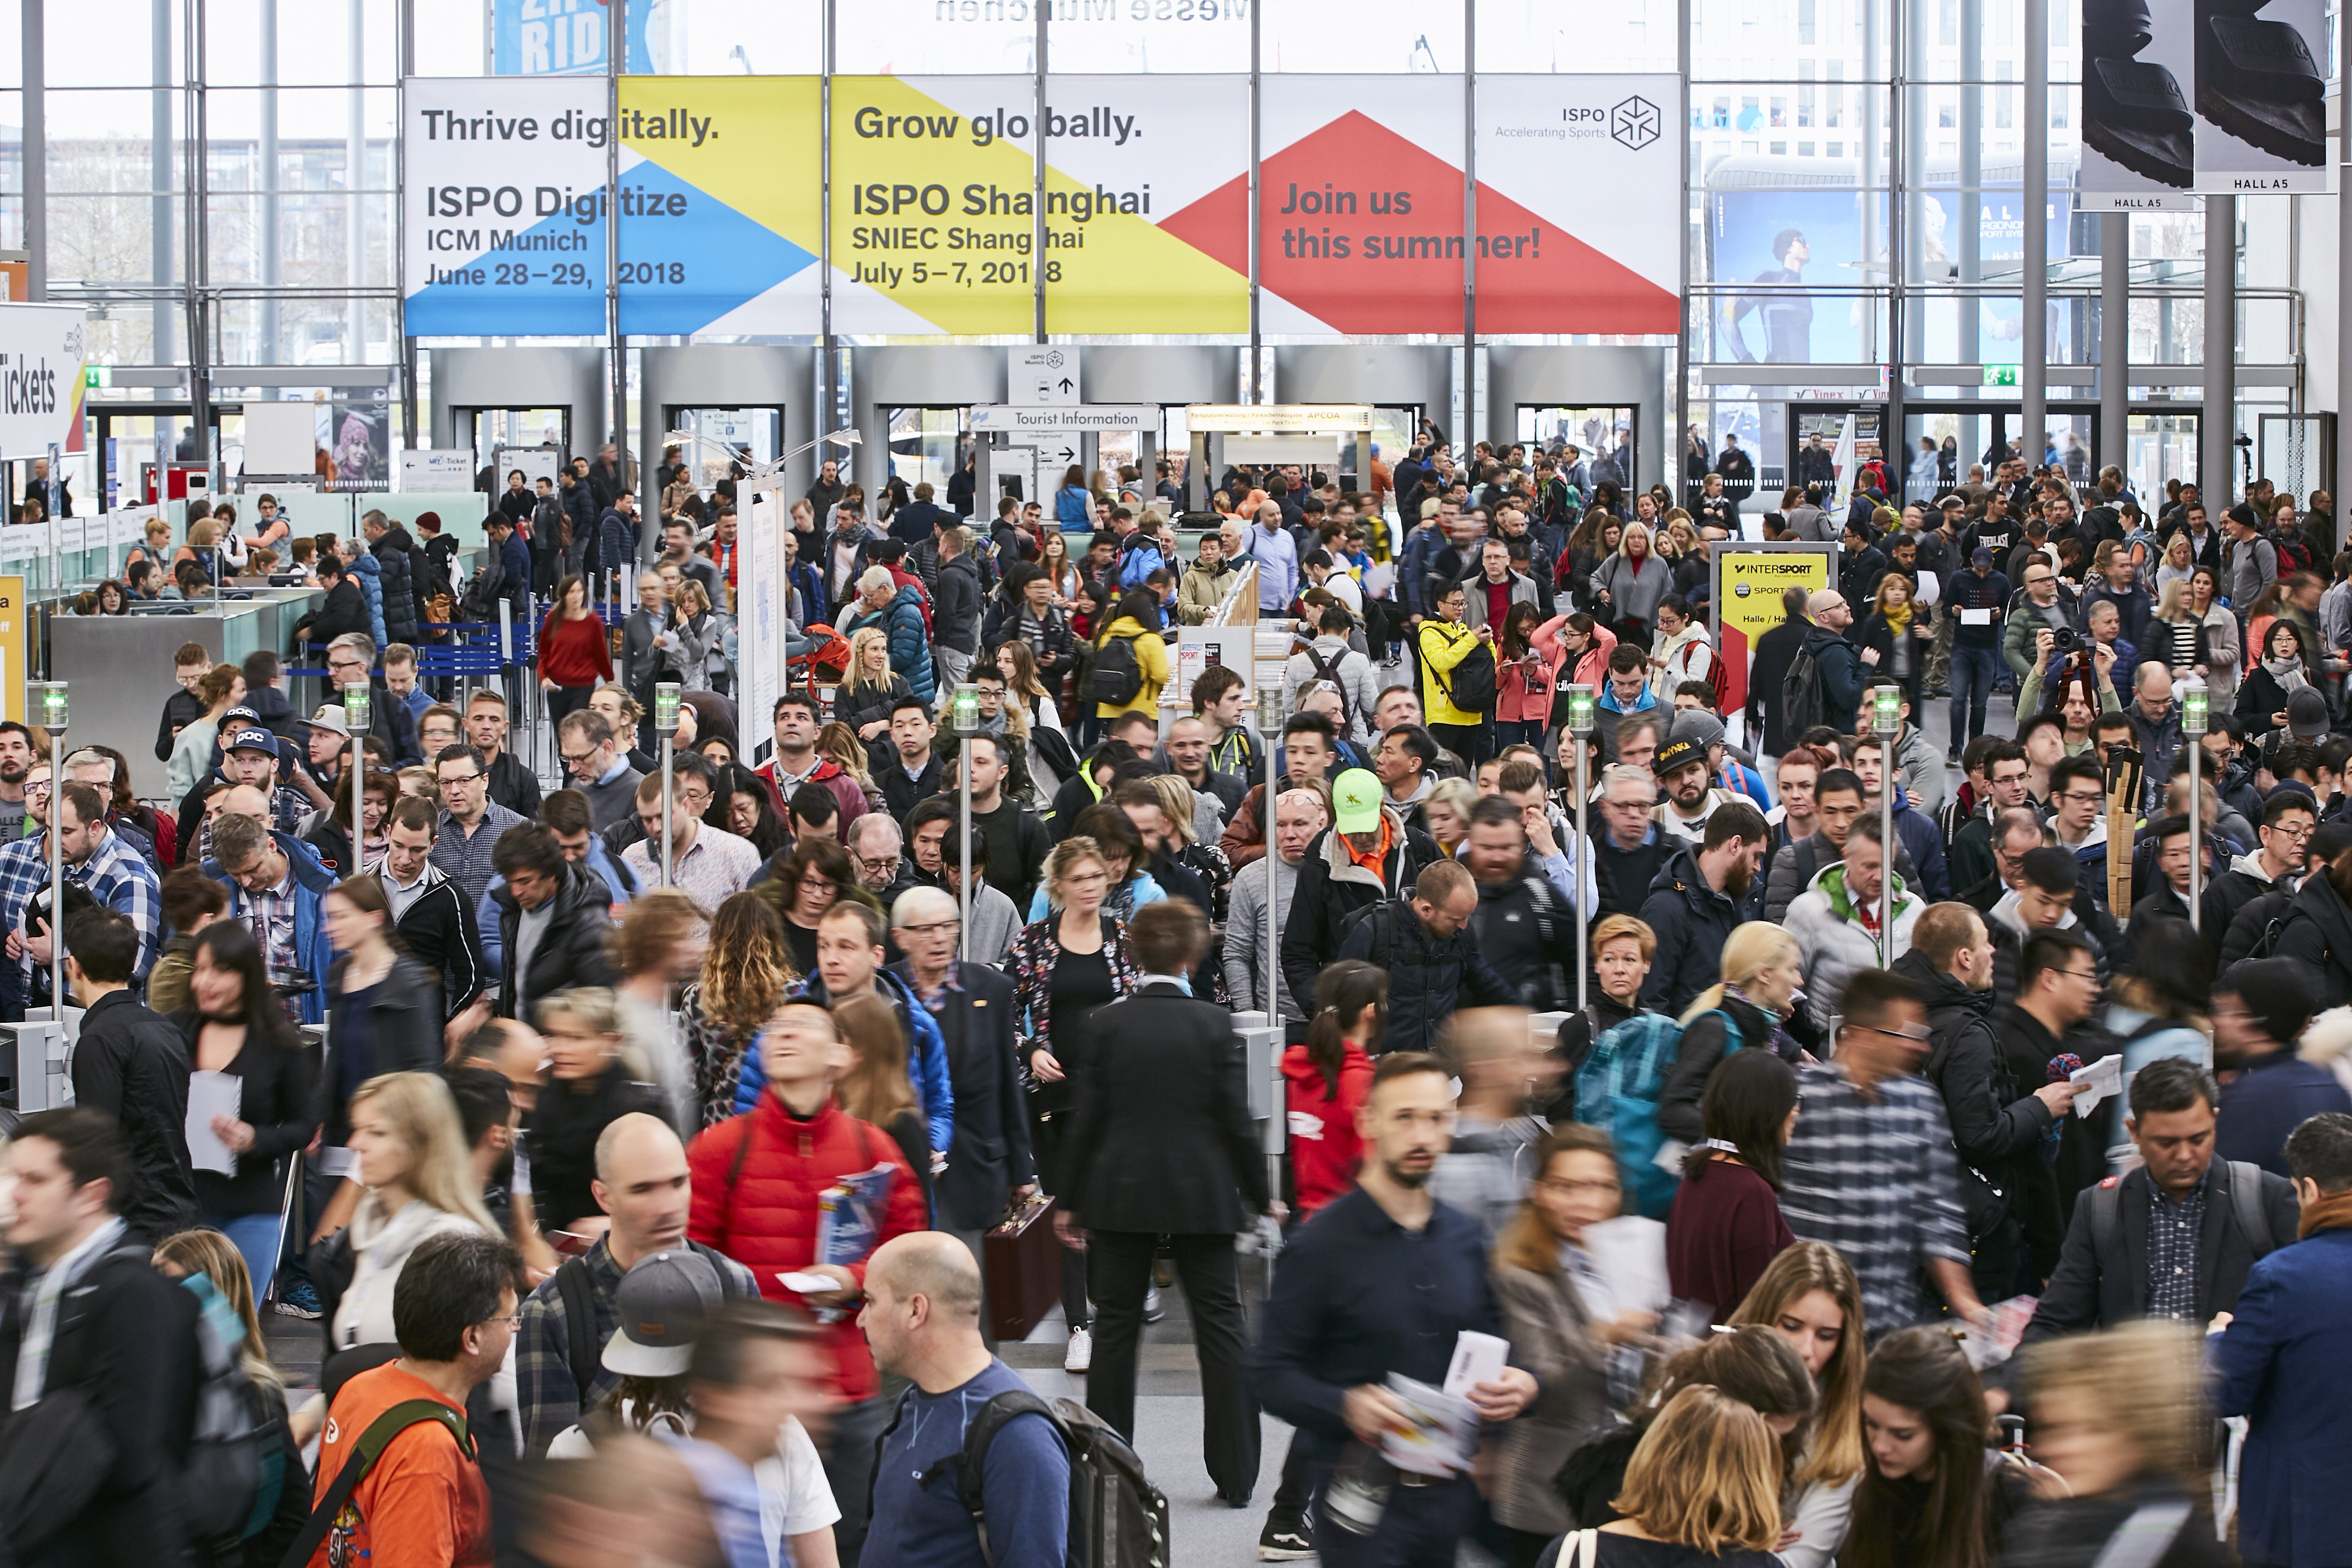 Permanent date changes for ISPO shows